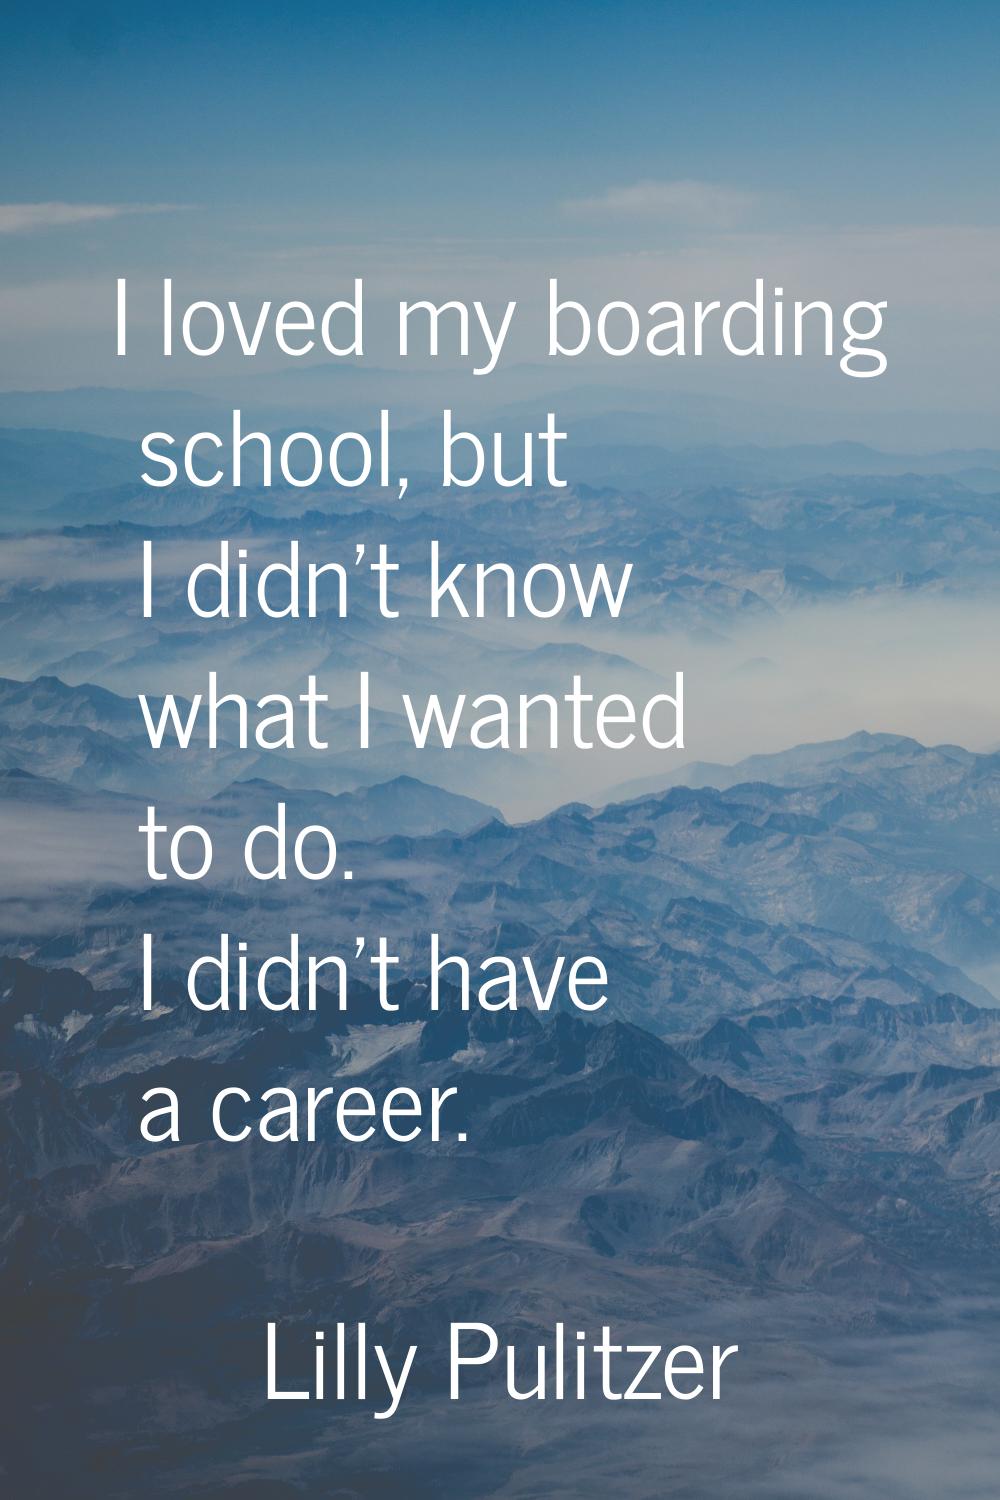 I loved my boarding school, but I didn't know what I wanted to do. I didn't have a career.